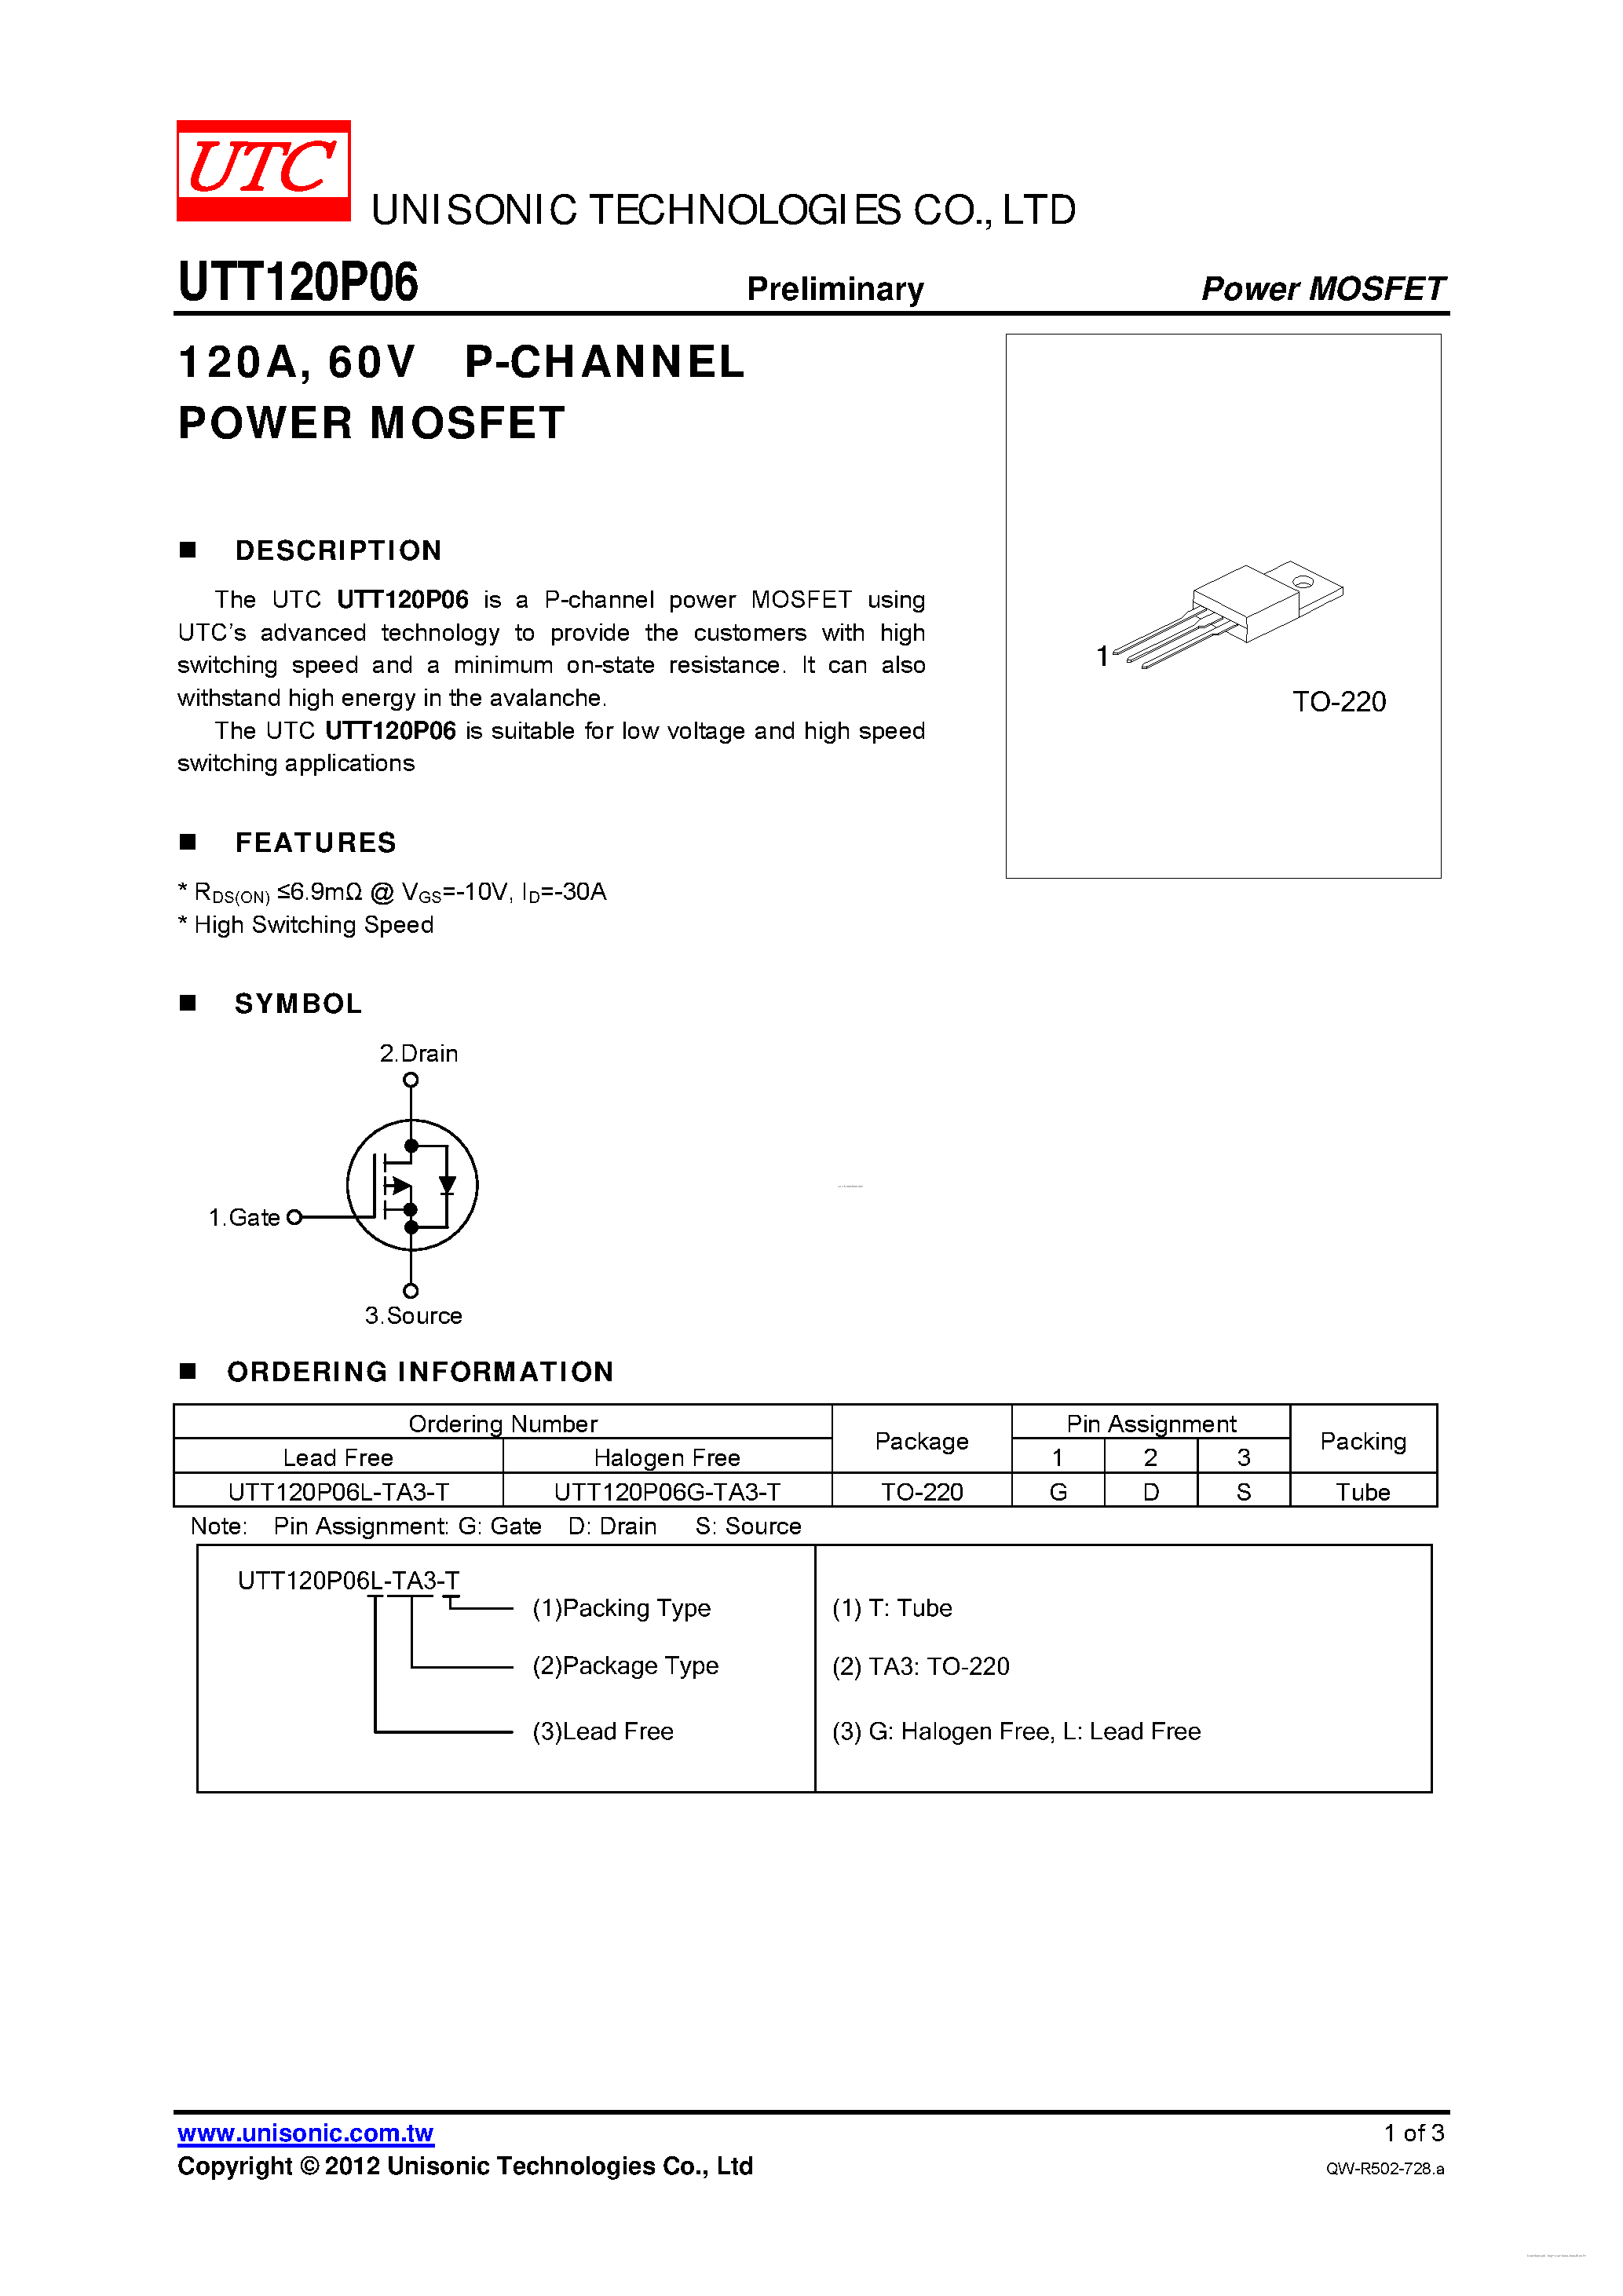 Даташит UTT120P06 - P-CHANNEL POWER MOSFET страница 1